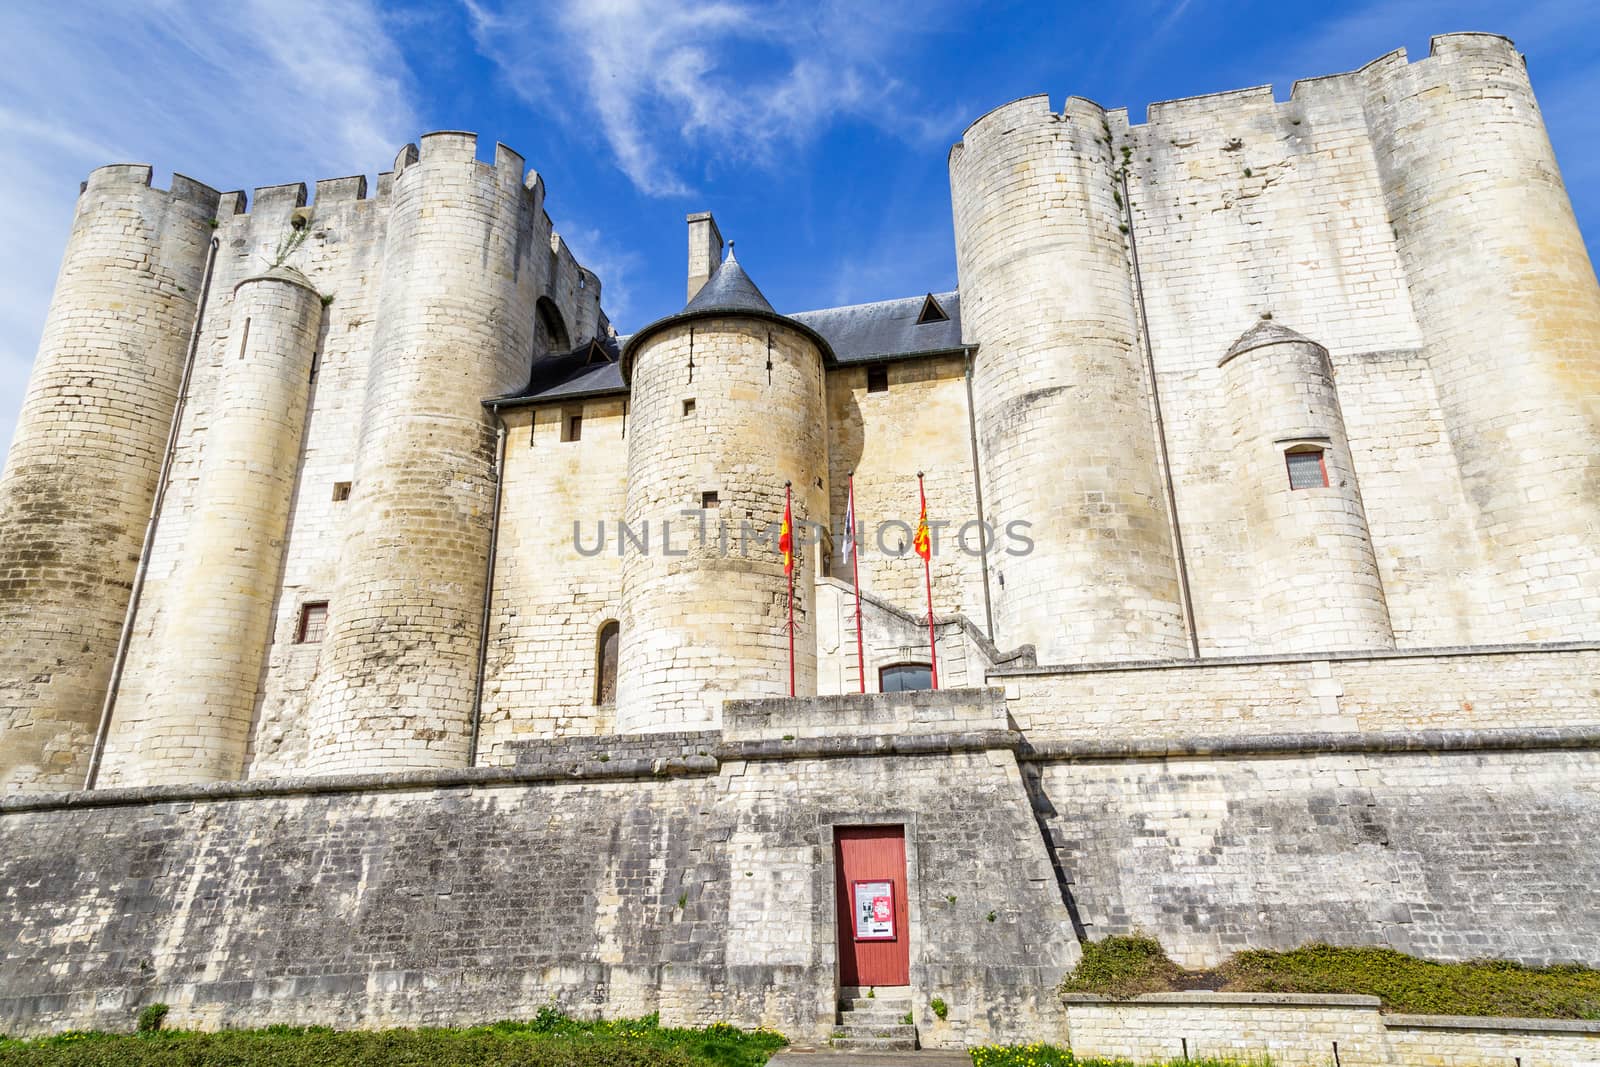 Paris, France - March 27, 2017: Beautiful medieval castle in Niort City, France by pixinoo